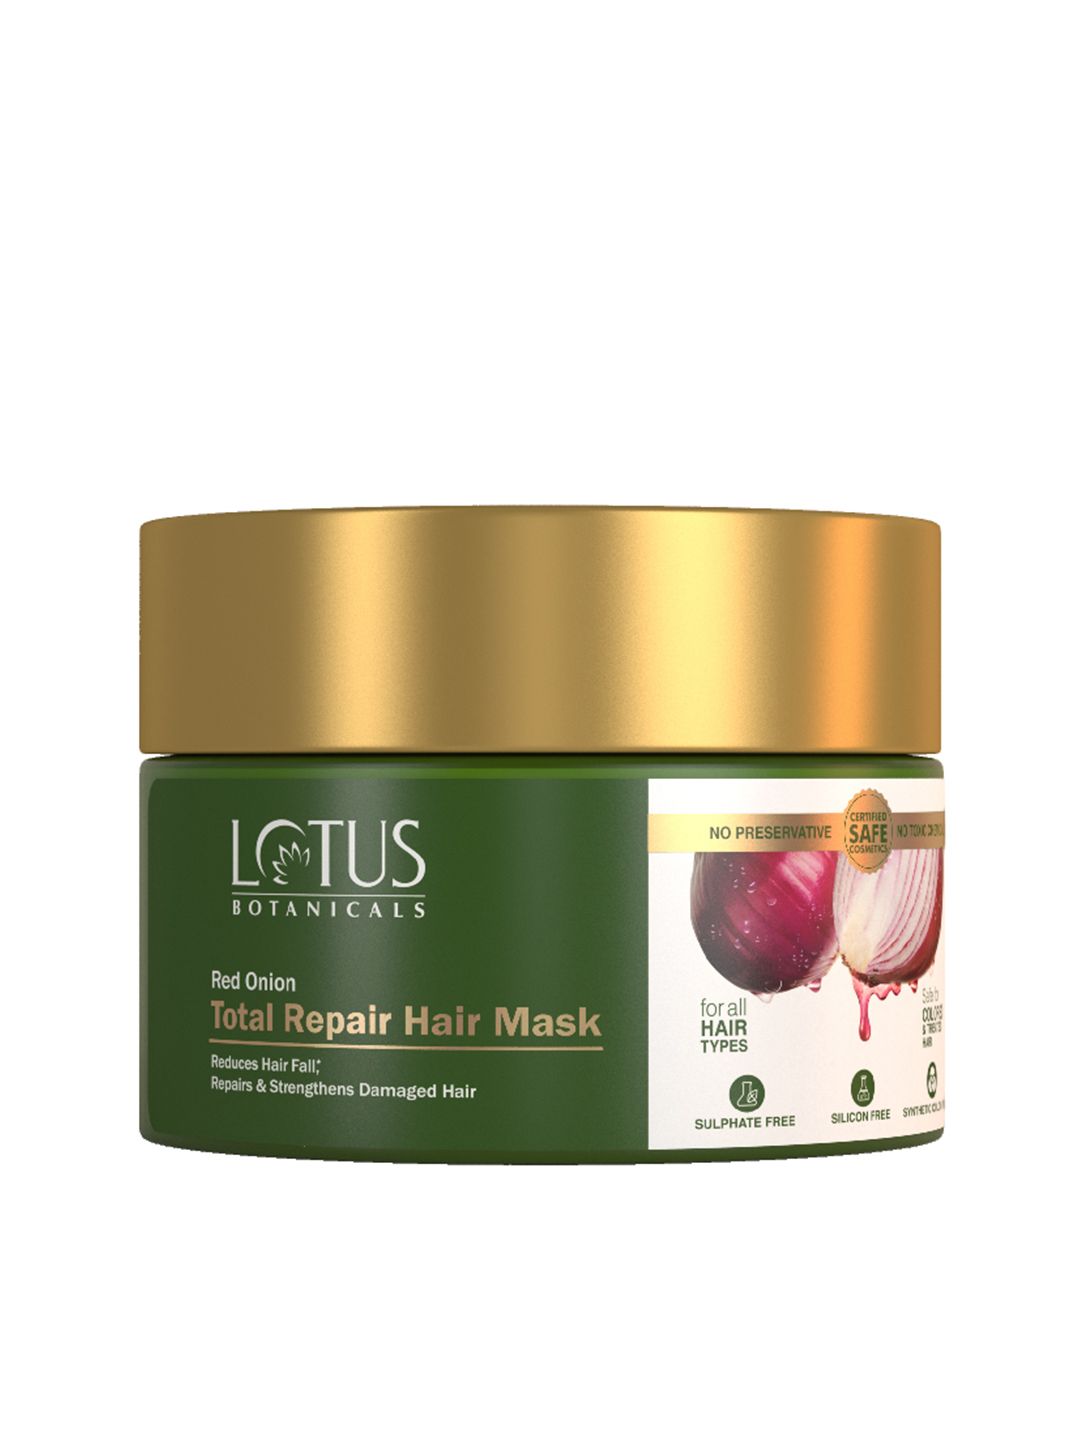 Lotus Botanicals Red Onion Total Repair Hair Mask with Ginseng 200 g Price in India